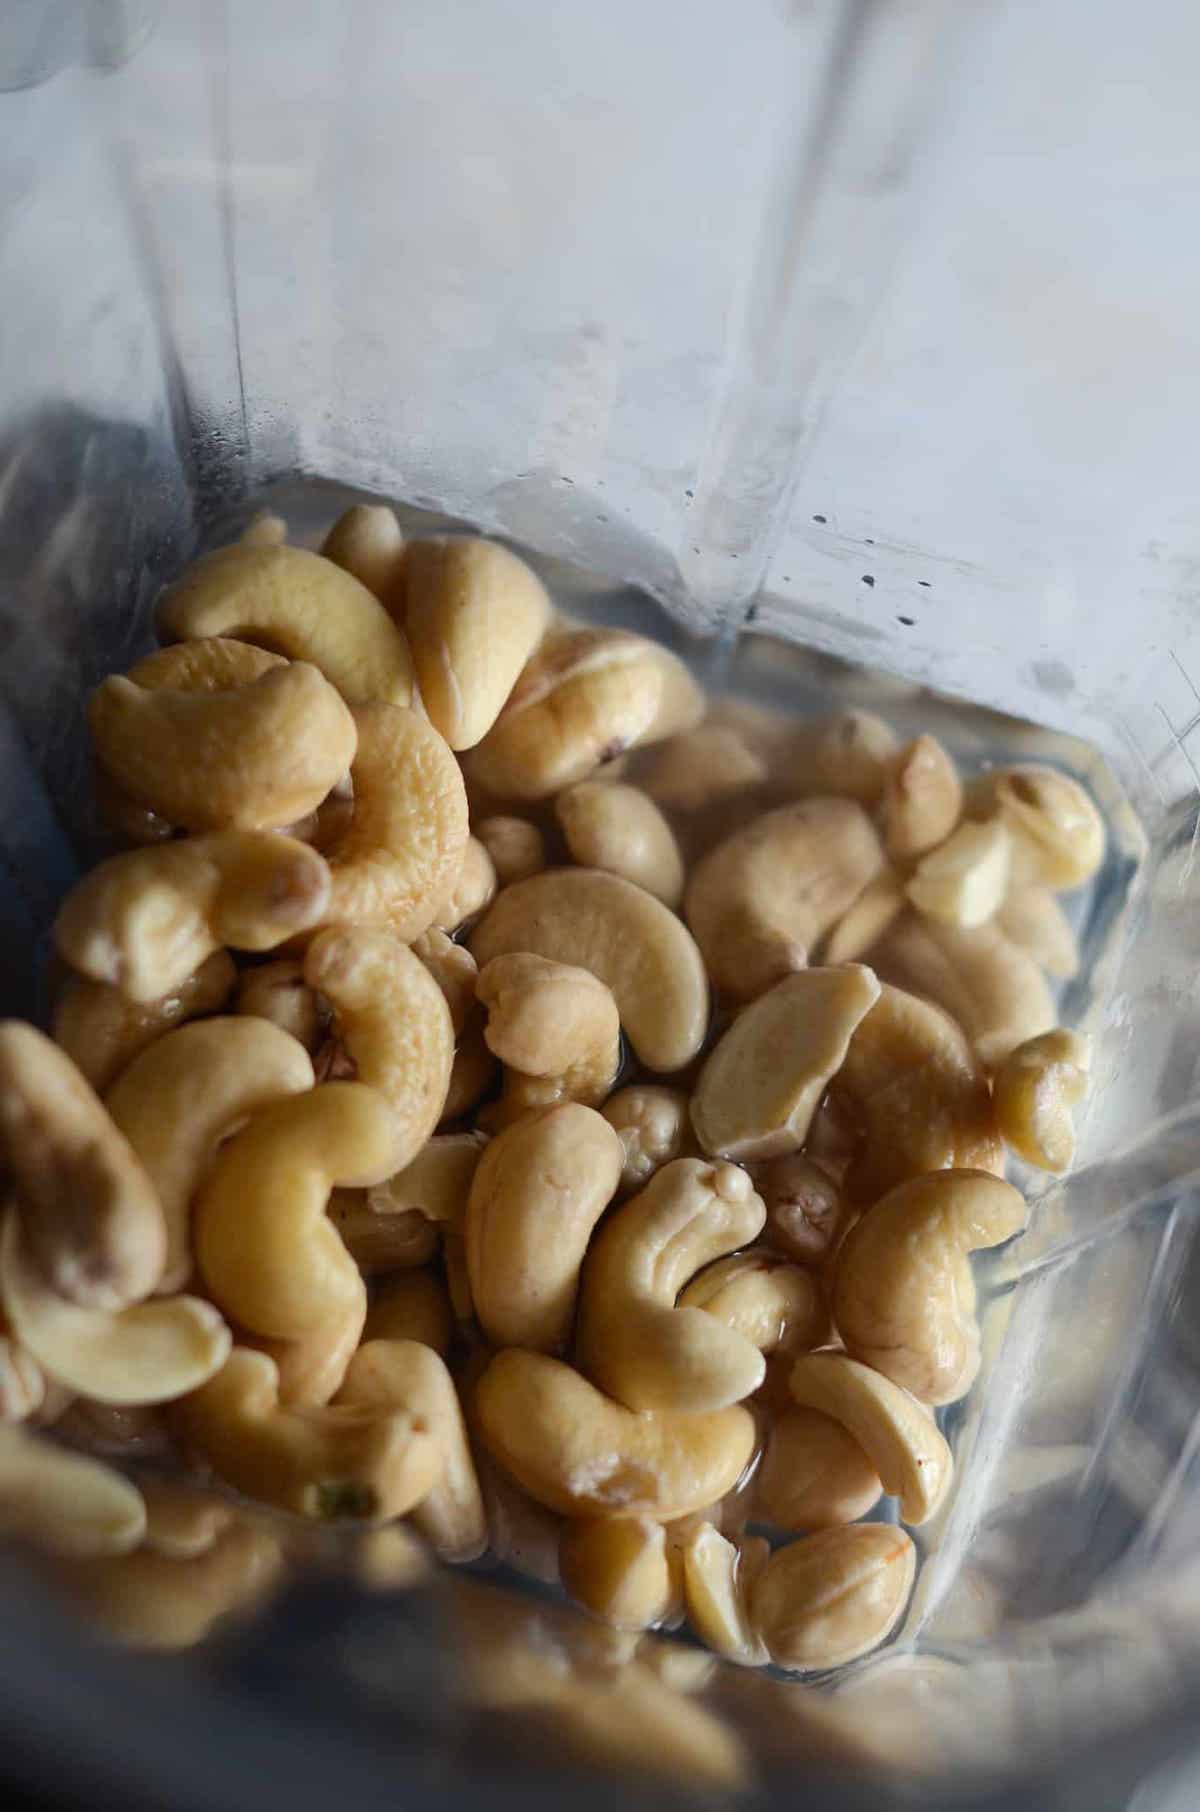 This is a photo of cashews in a blender.